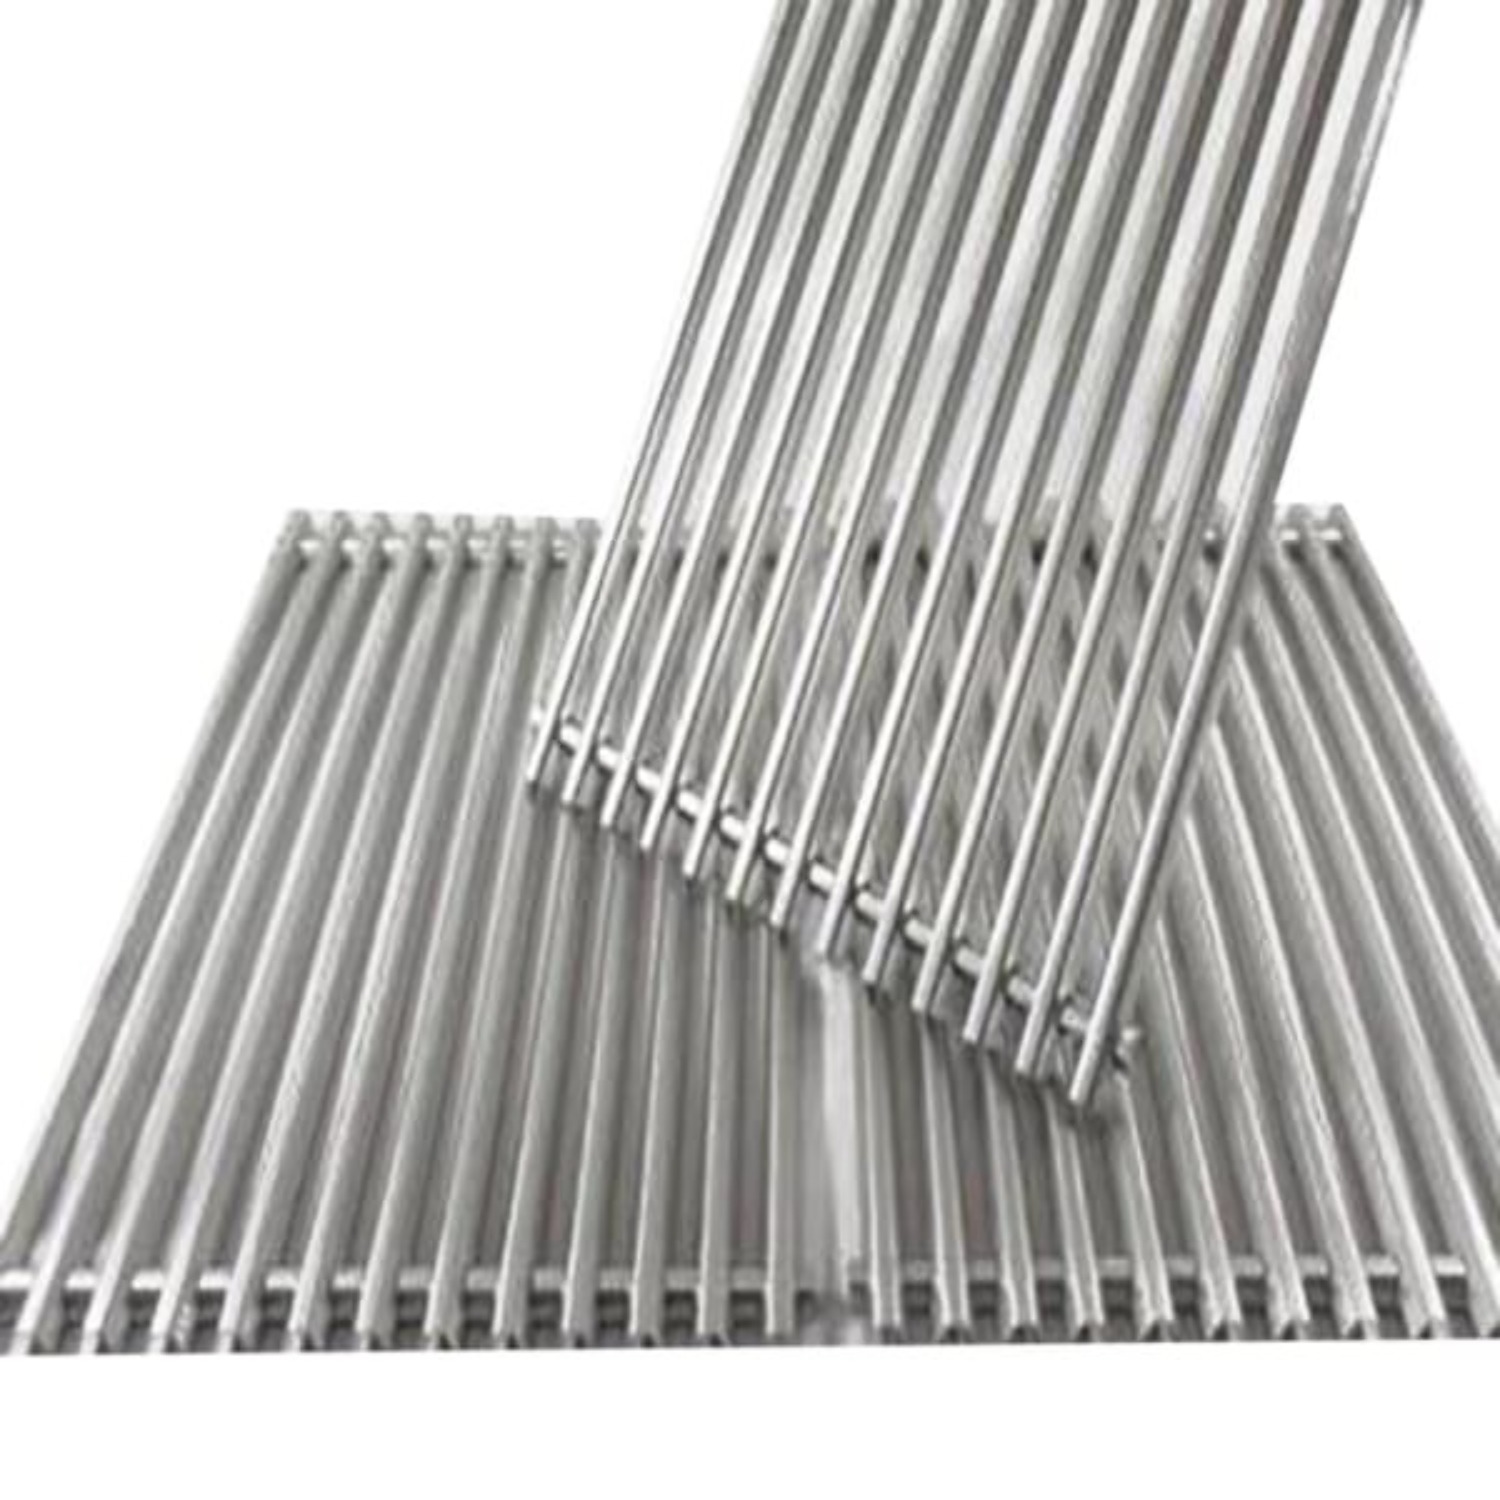 BBQ Grill Compatible With Weber Grills 3 Piece SS Grates 17-1/4 x 35-1/4 BCP85312 - image 2 of 4